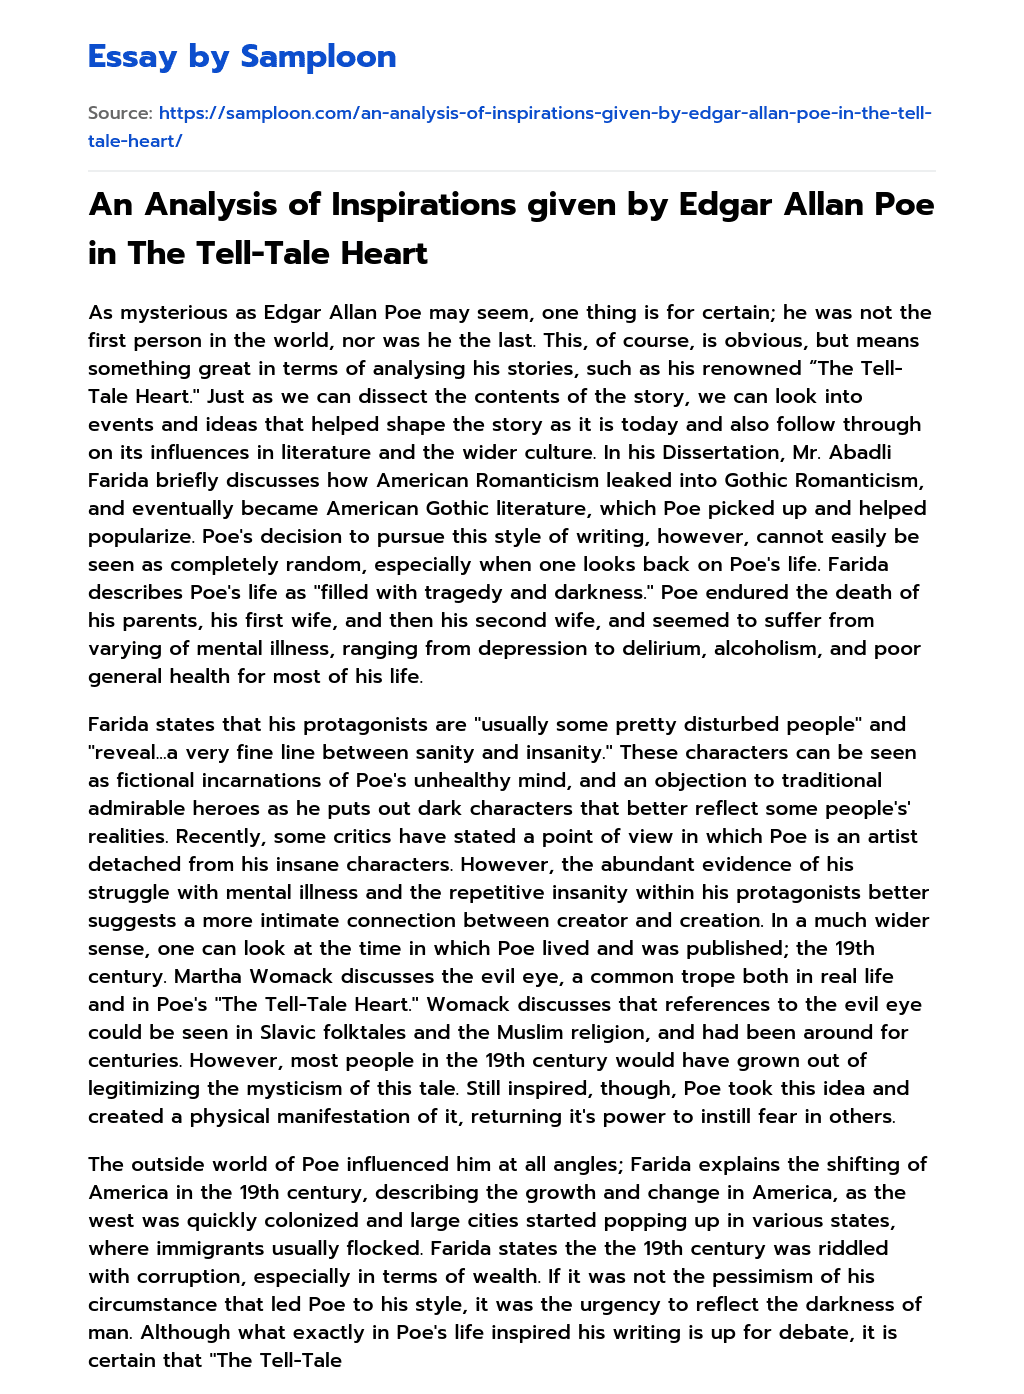 An Analysis of Inspirations given by Edgar Allan Poe in The Tell-Tale Heart essay